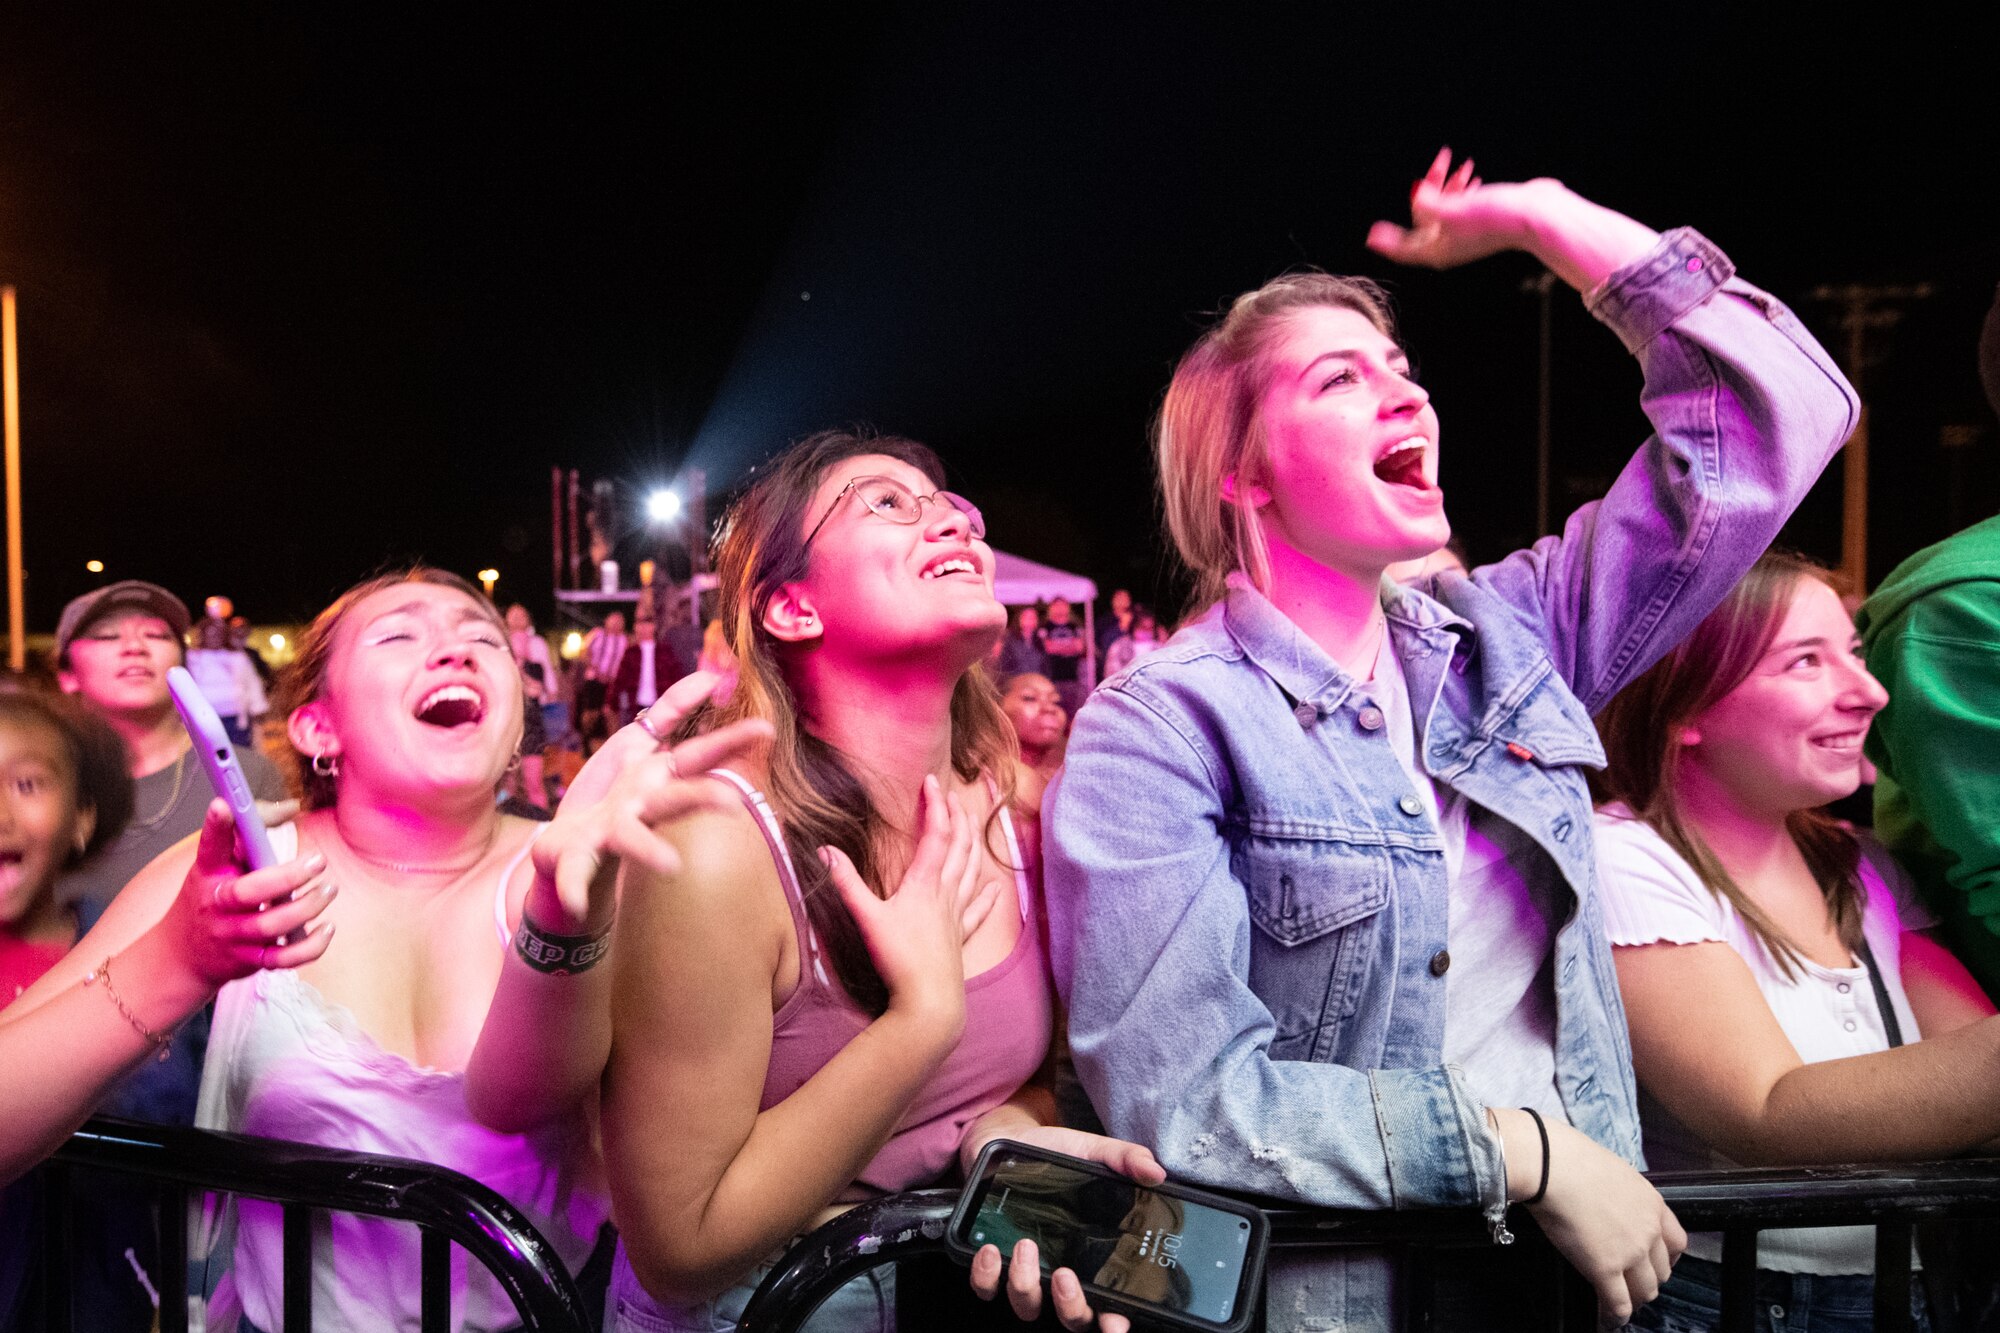 Spectators sing along with gospel singer
Tori Kelly at the End of Summer Concert
at Dover Air Force Base, Delaware, Sept.
10, 2021. The concert also featured
hip-hop artist Lecrae and was the base’s
first open air concert since 2018. (U.S. Air
Force photo by Mauricio Campino)